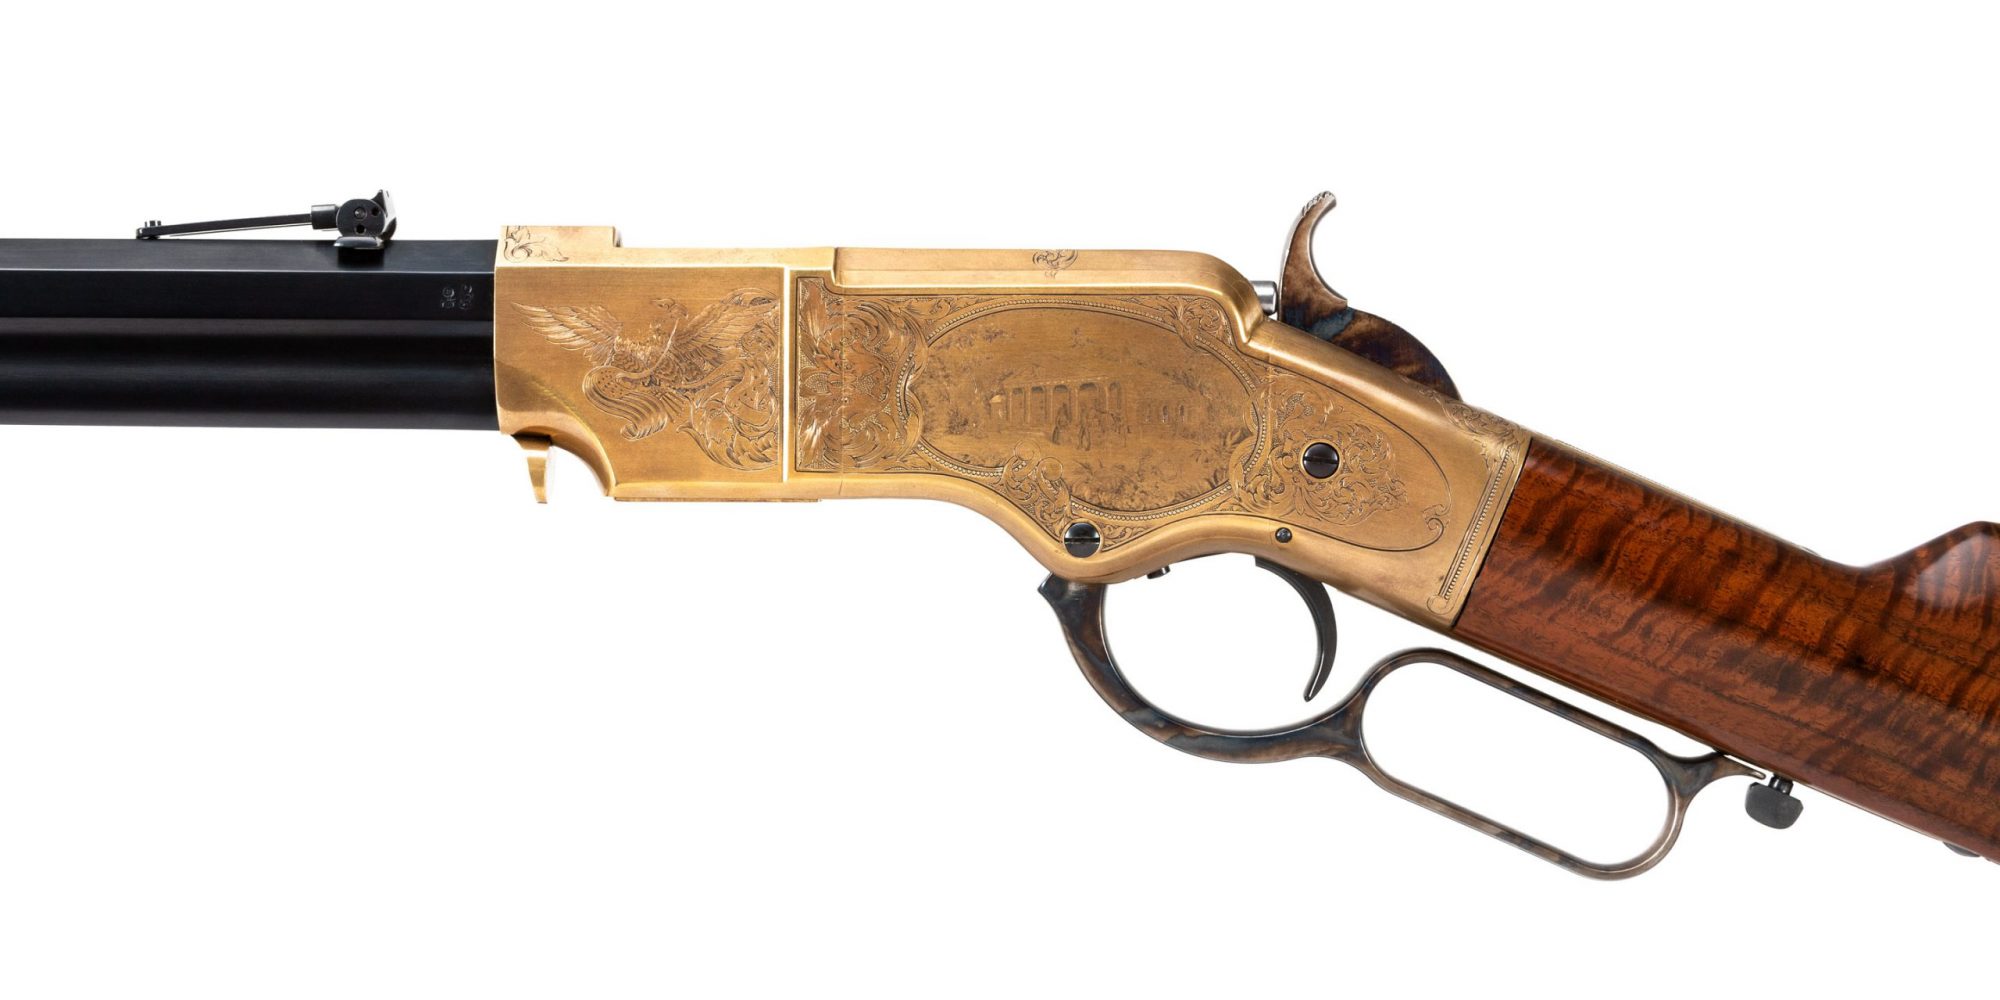 Photo of a Navy Arms A. Uberti 1860 Henry, Engraved by FEGA Master Lee Griffiths, sold as-is by Turnbull Restoration